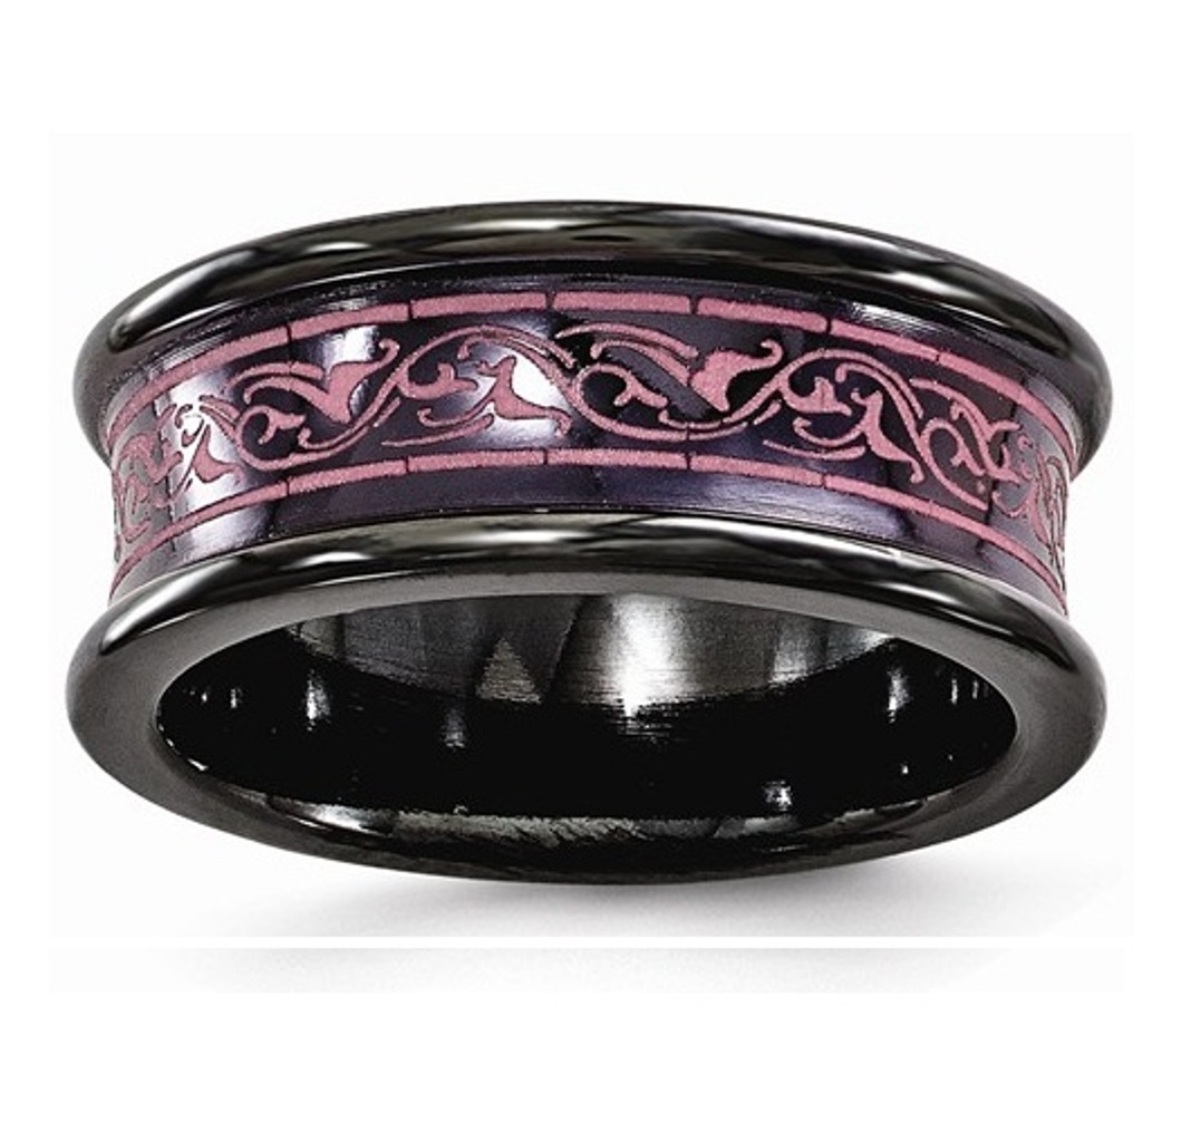  Black Ti Concave Anodized Pink Band